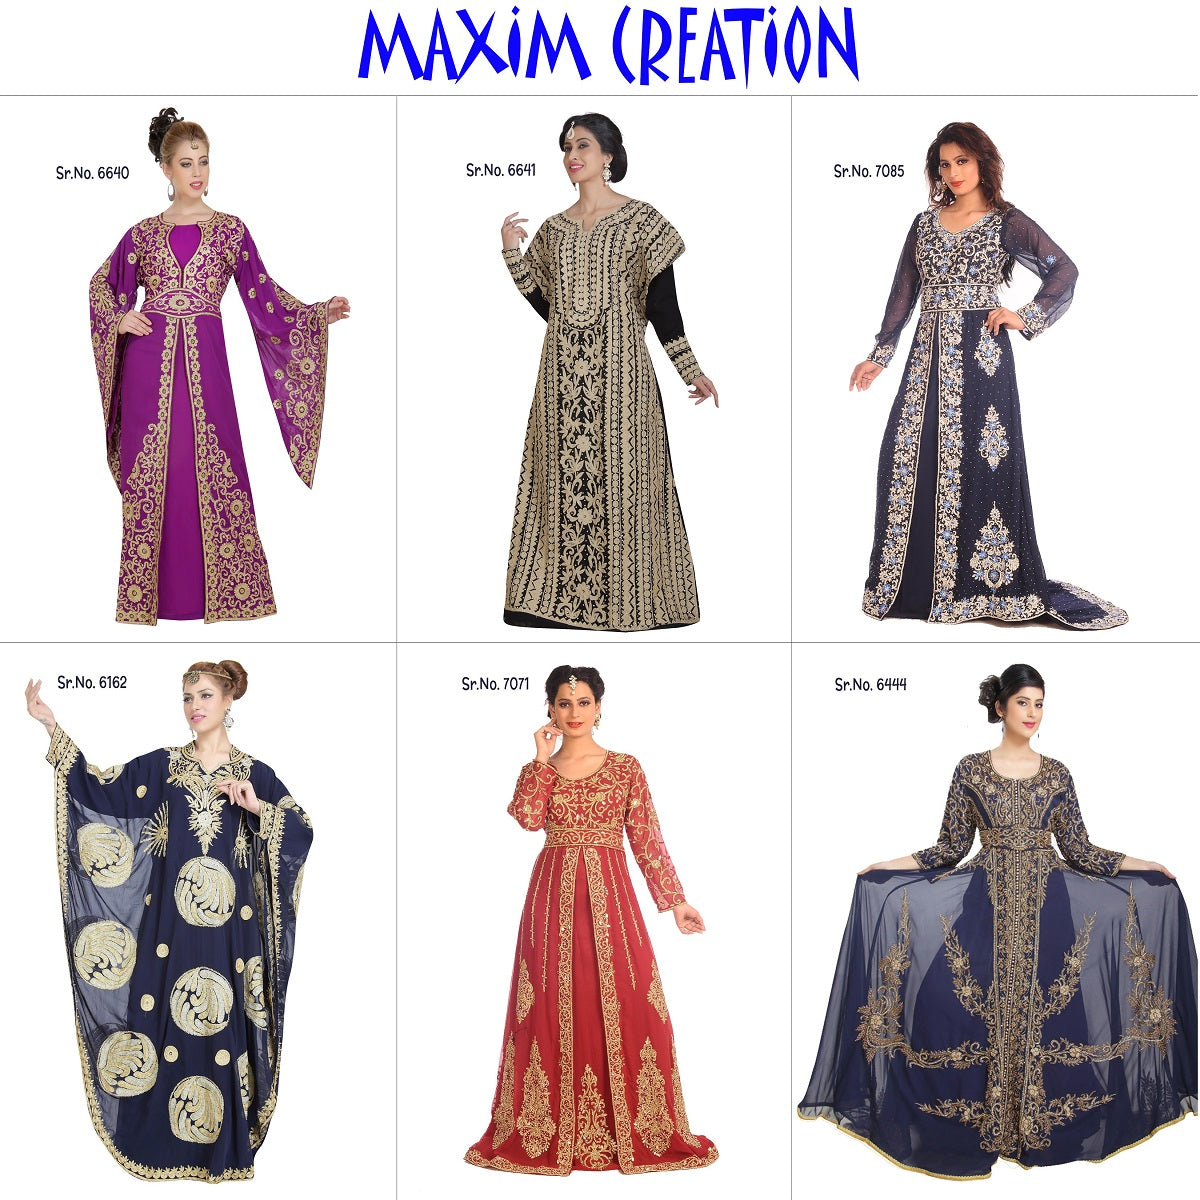 Load image into Gallery viewer, Casual Poncho Gown Maxi Dress - Maxim Creation
